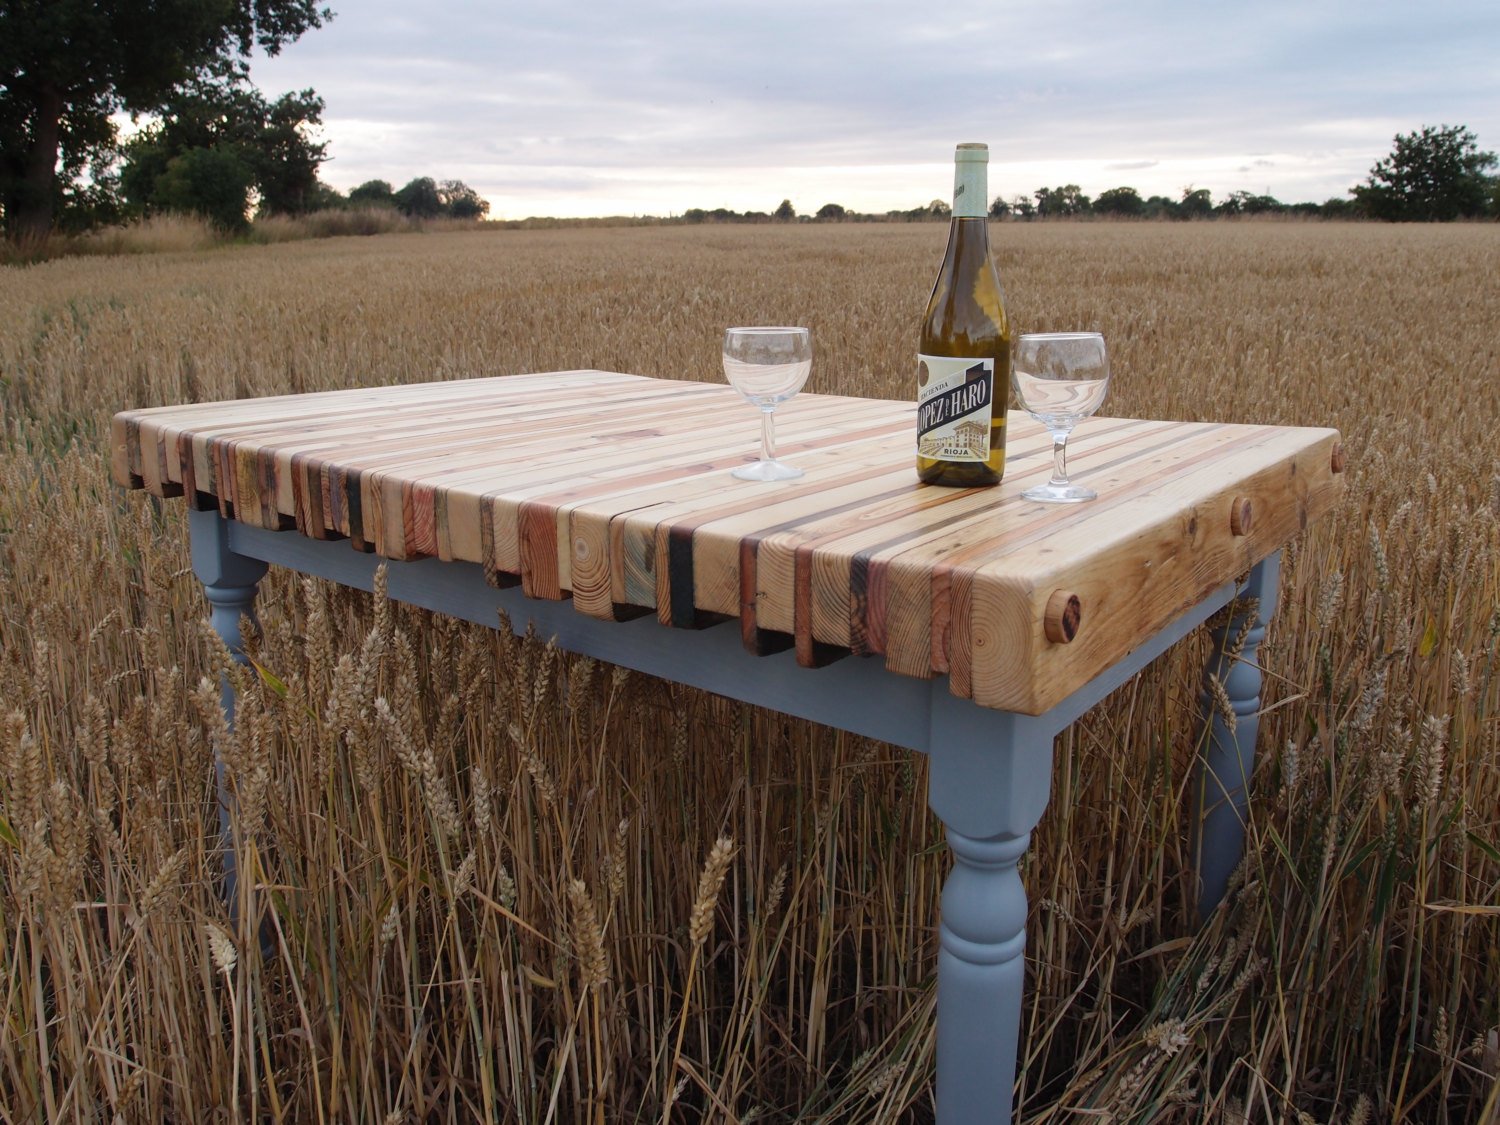 What are some craft ideas from wooden pallets?